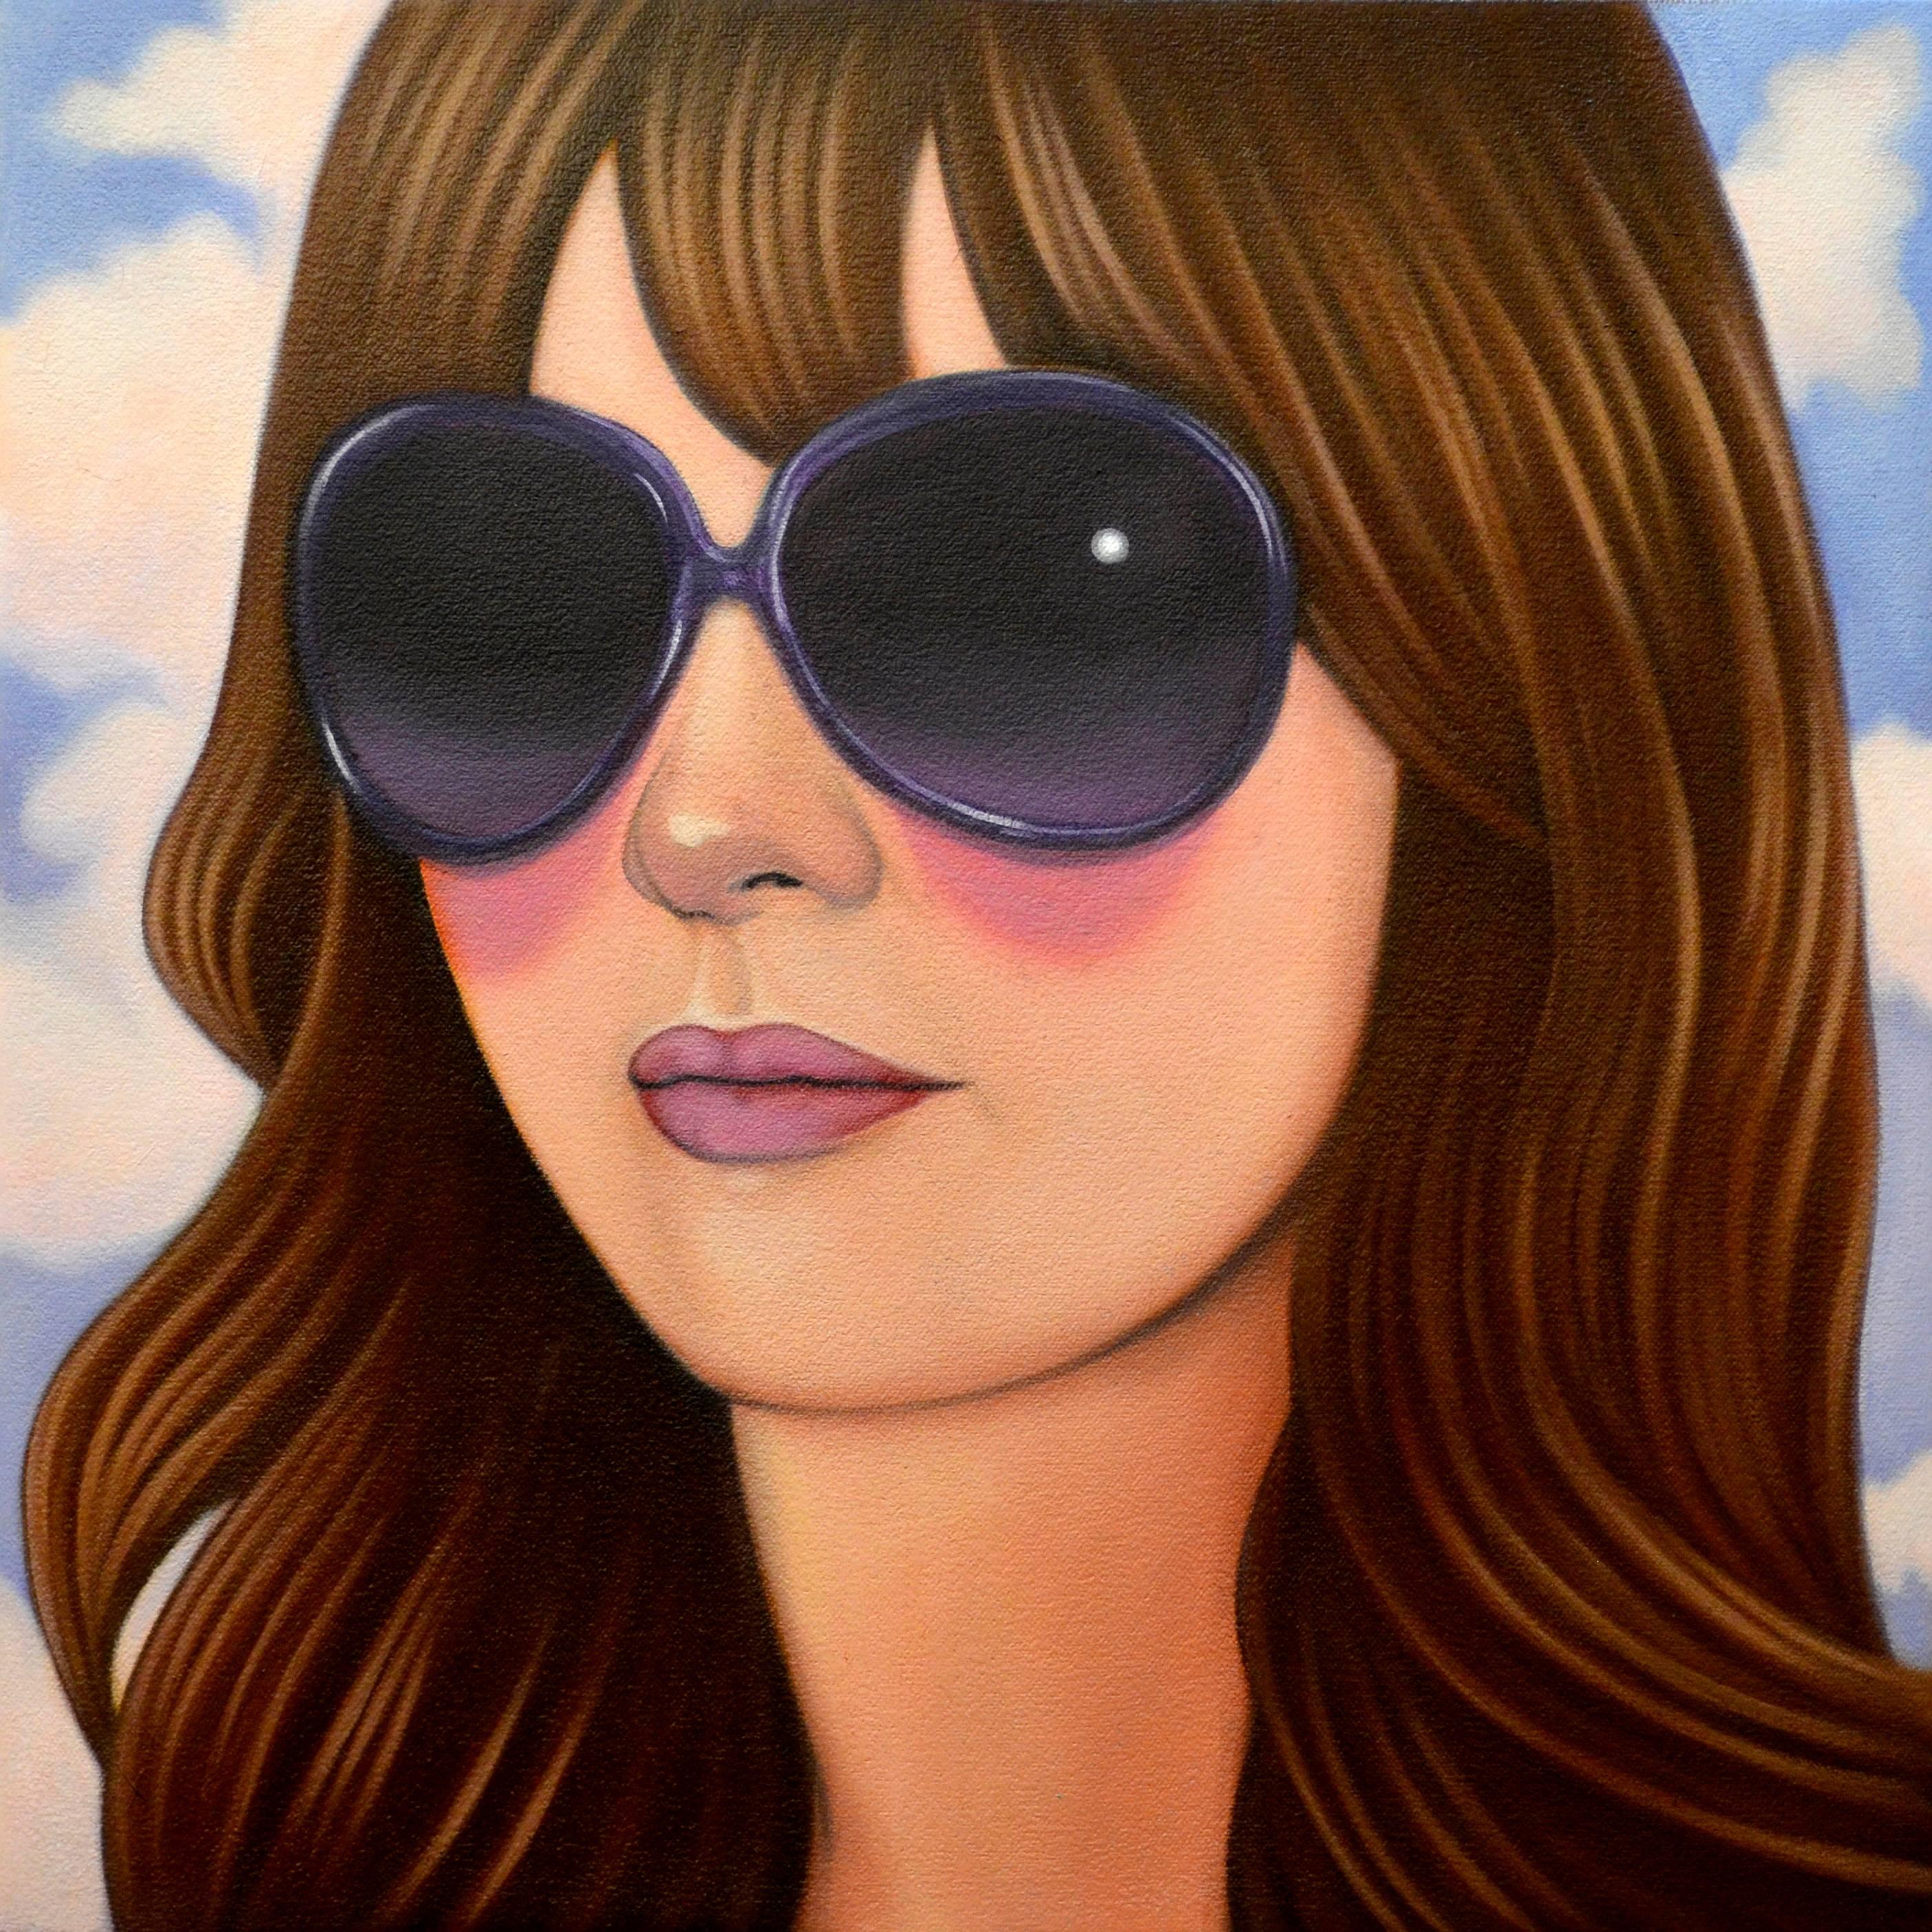 12 by Jeff Chester, realistic oil painting of woman's face wearing sunglasses